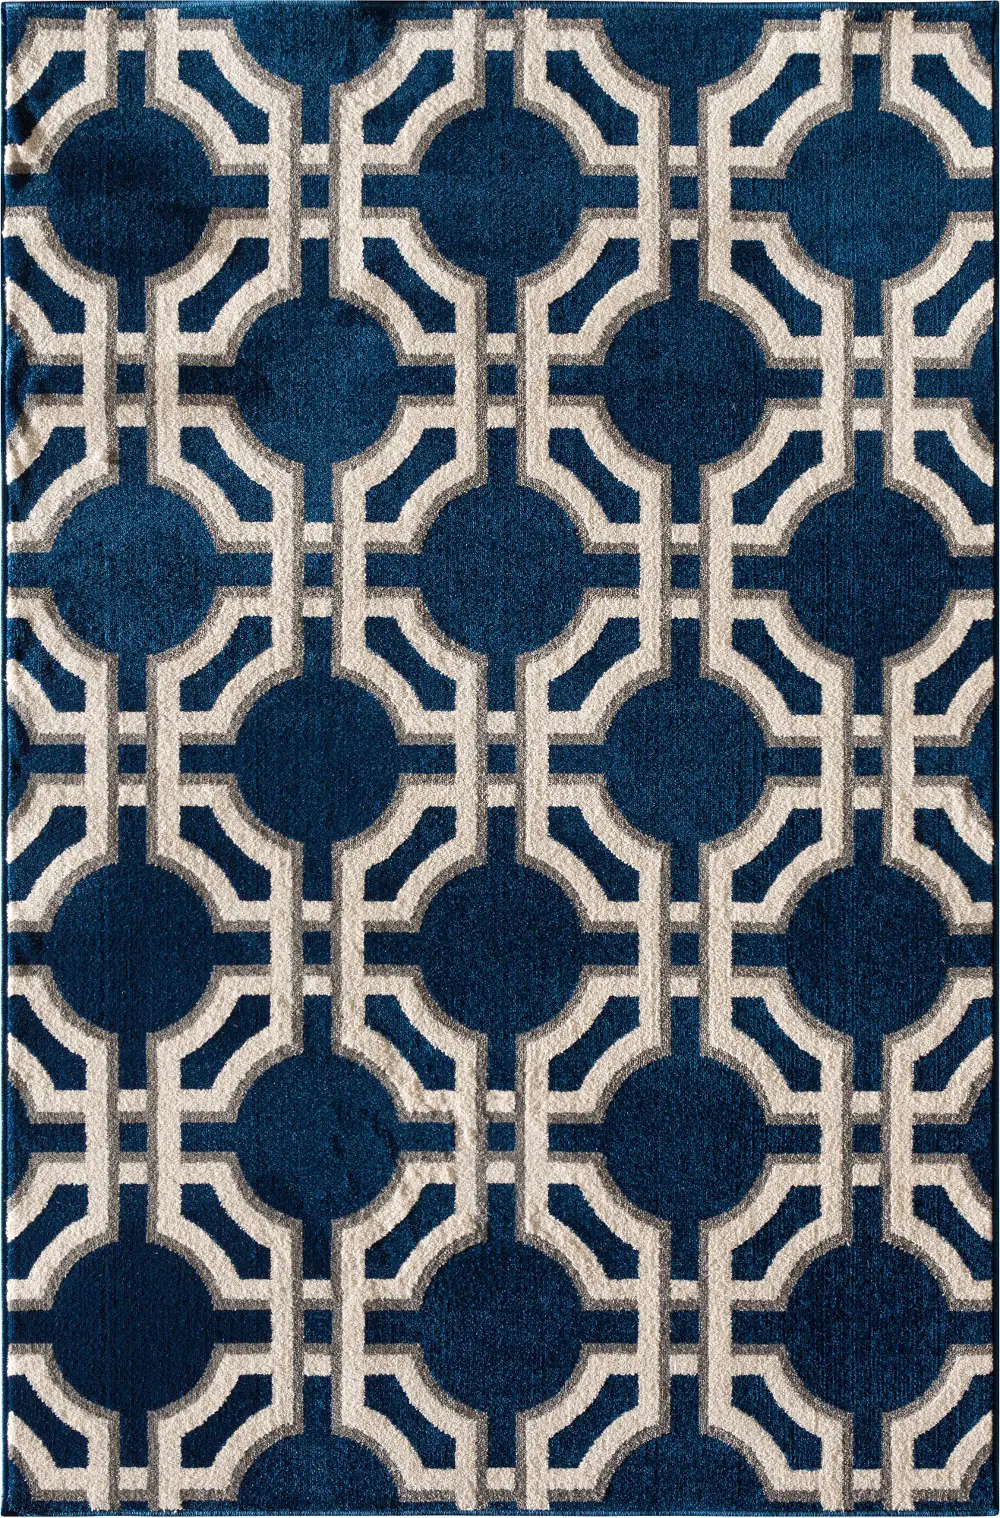 8 x 10 Large Sapphire Blue and White Indoor-Outdoor Rug - Terrace-1